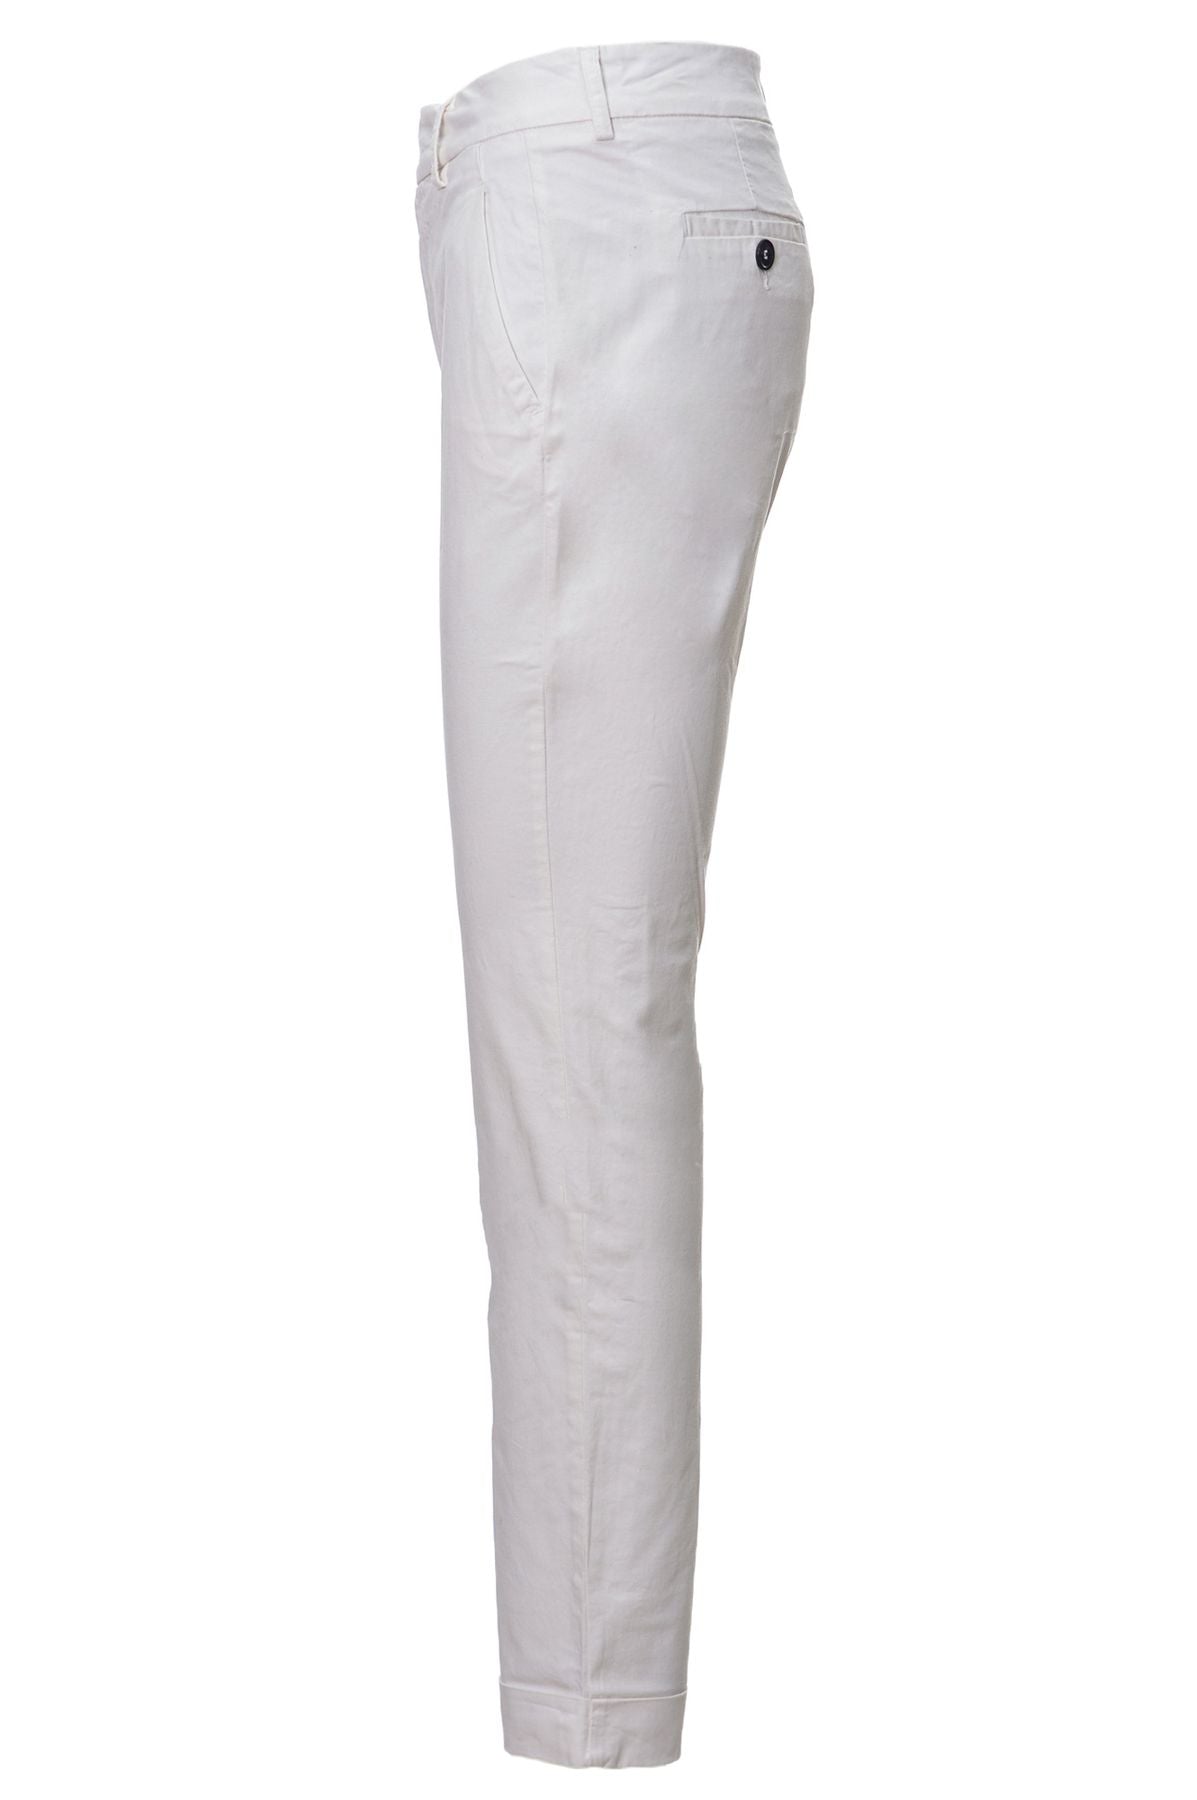 PEUTEREY Spring/Summer Cotton Trousers